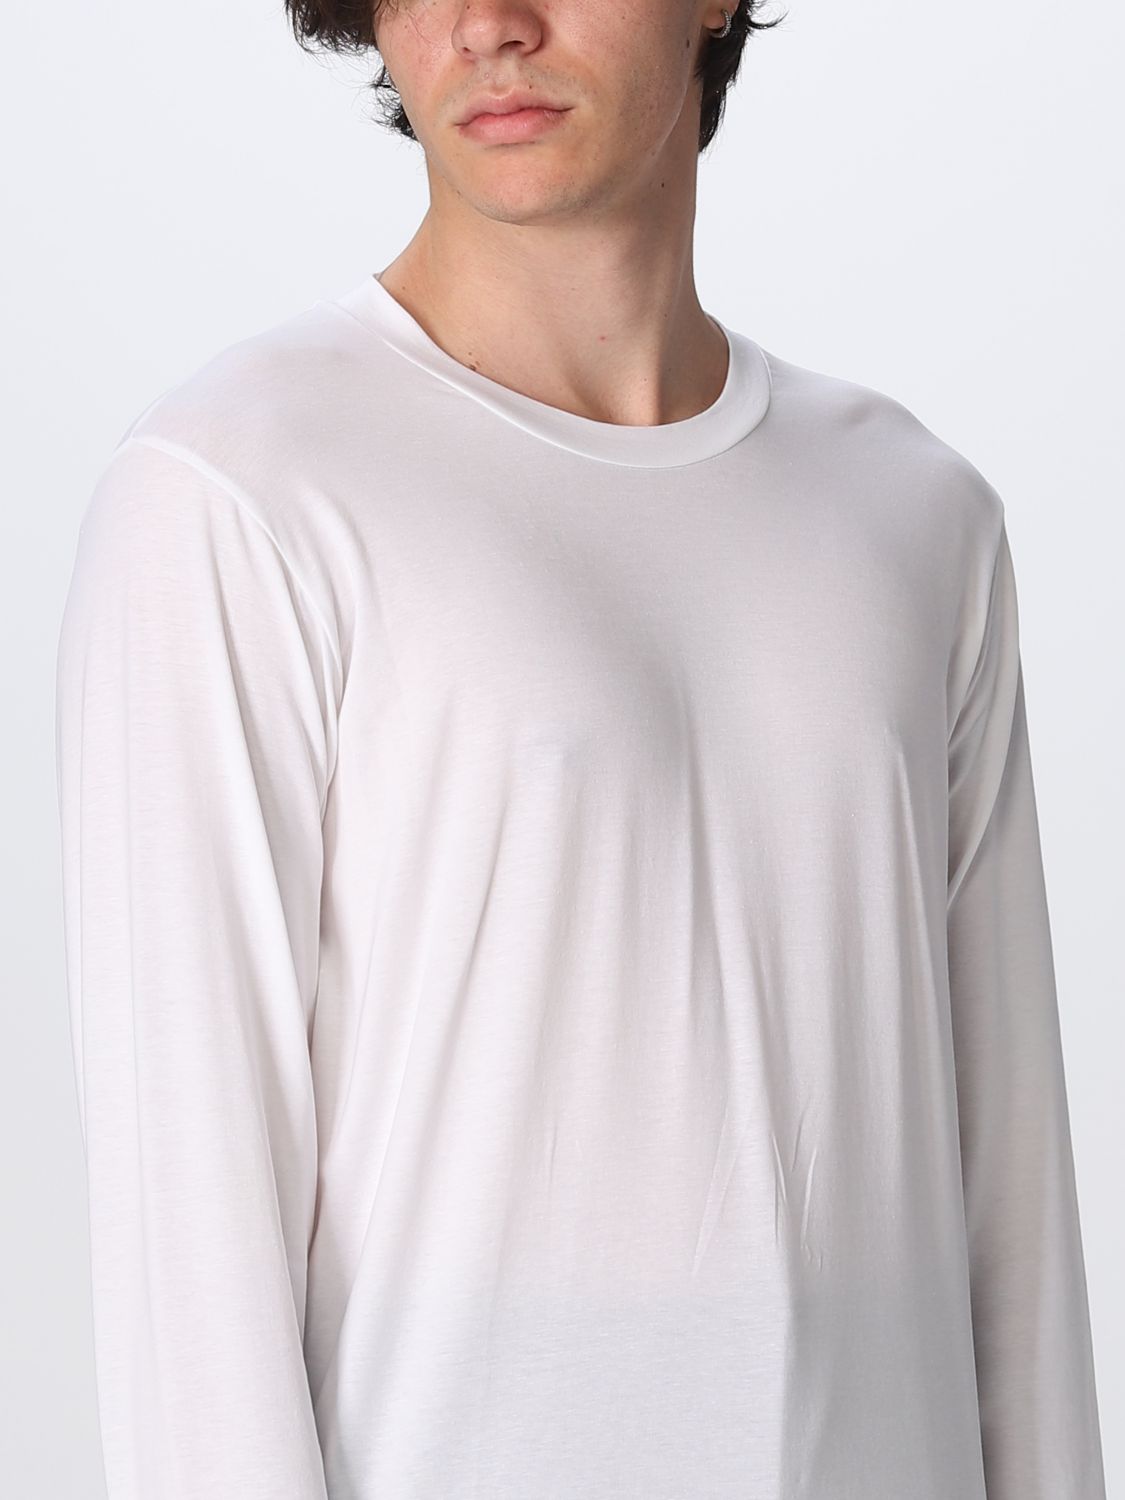 Tom Ford Outlet: t-shirt for man - White | Tom Ford t-shirt T4M14141 online  on 